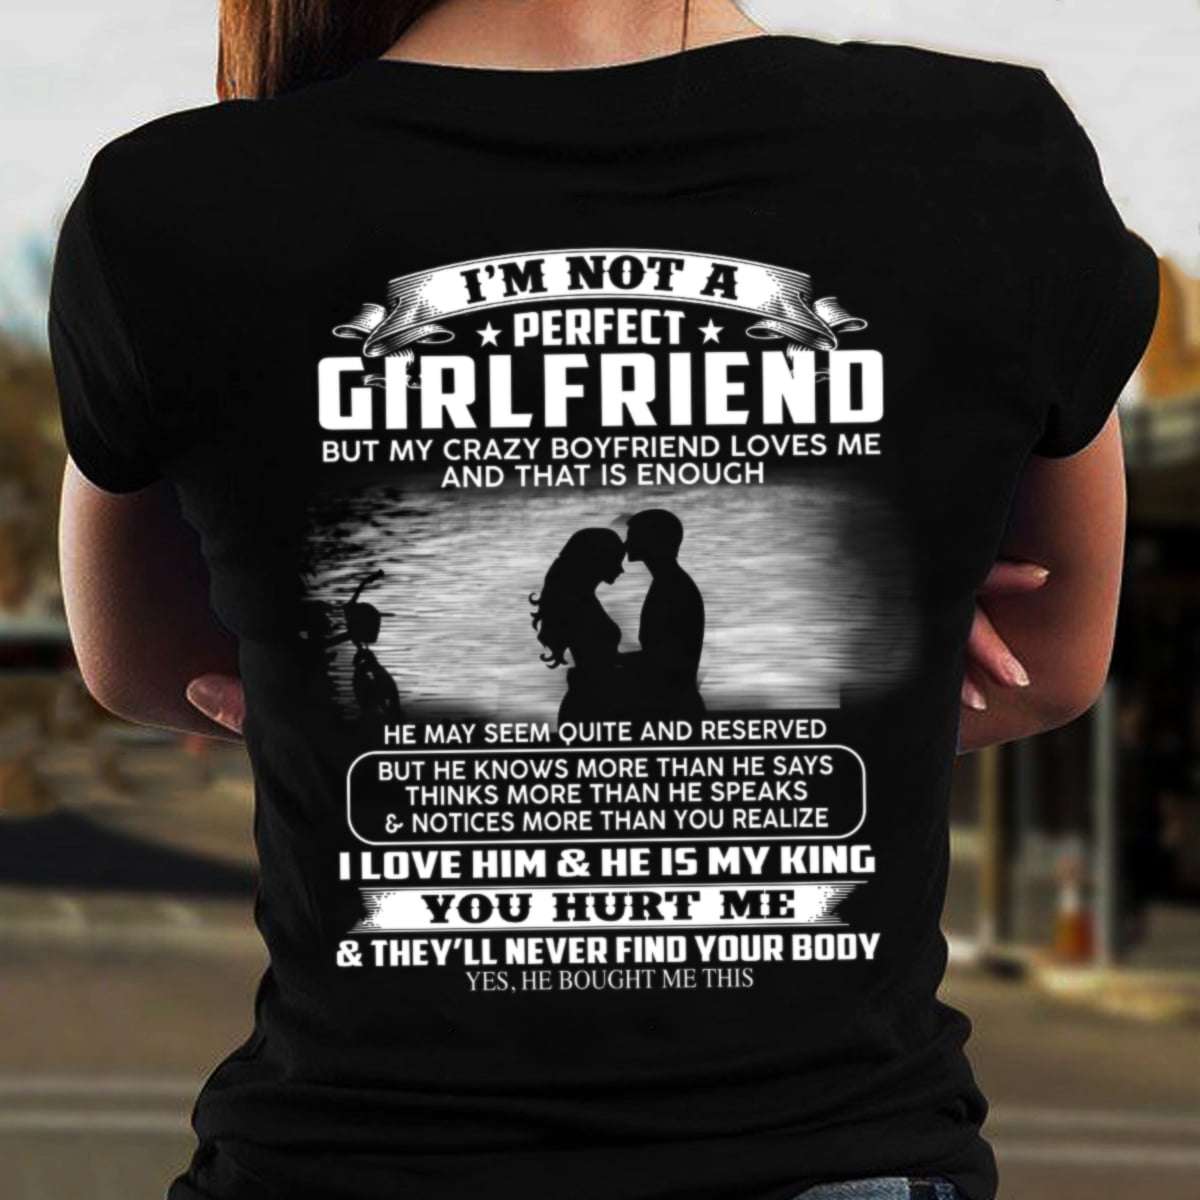 I'm not a perfect girlfriend but my crazy boyfriend loves me - Girlfriend and boyfriend